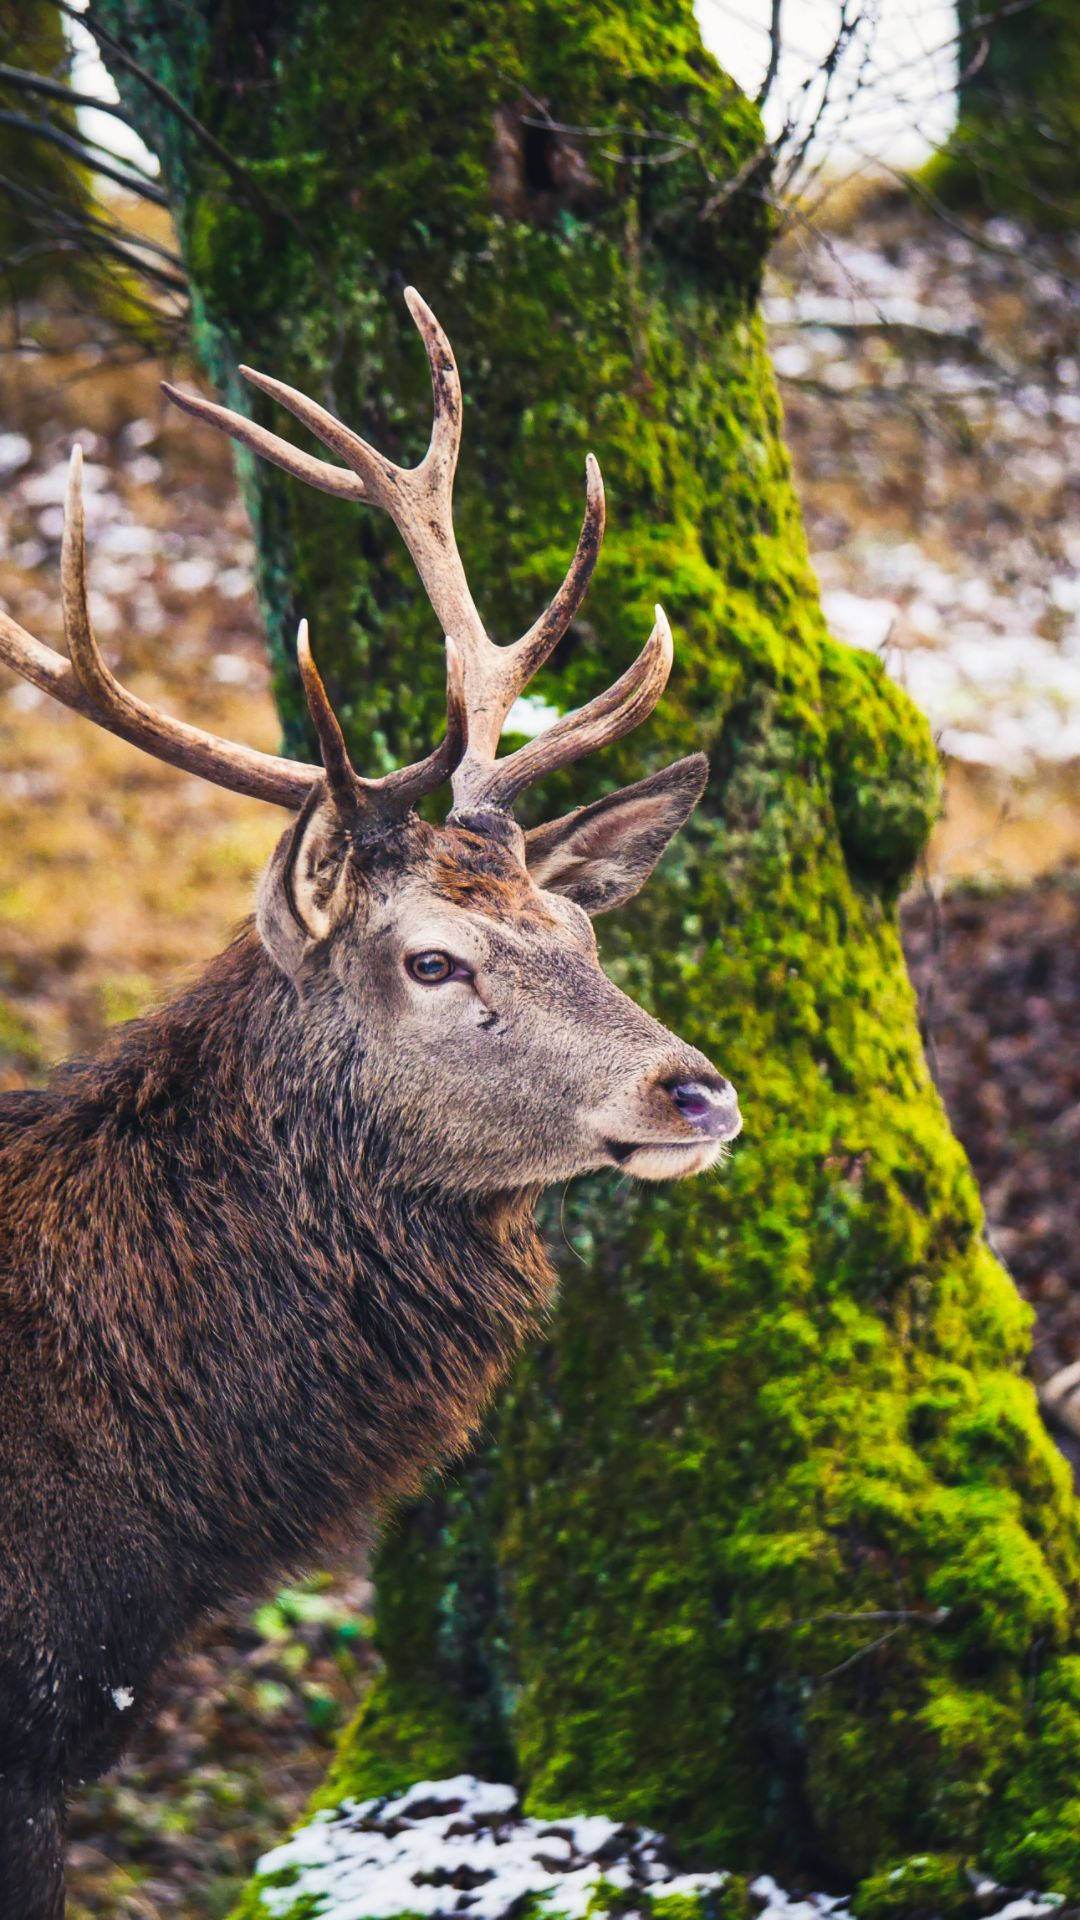 Get Ready for Fall with the Deer Iphone Wallpaper